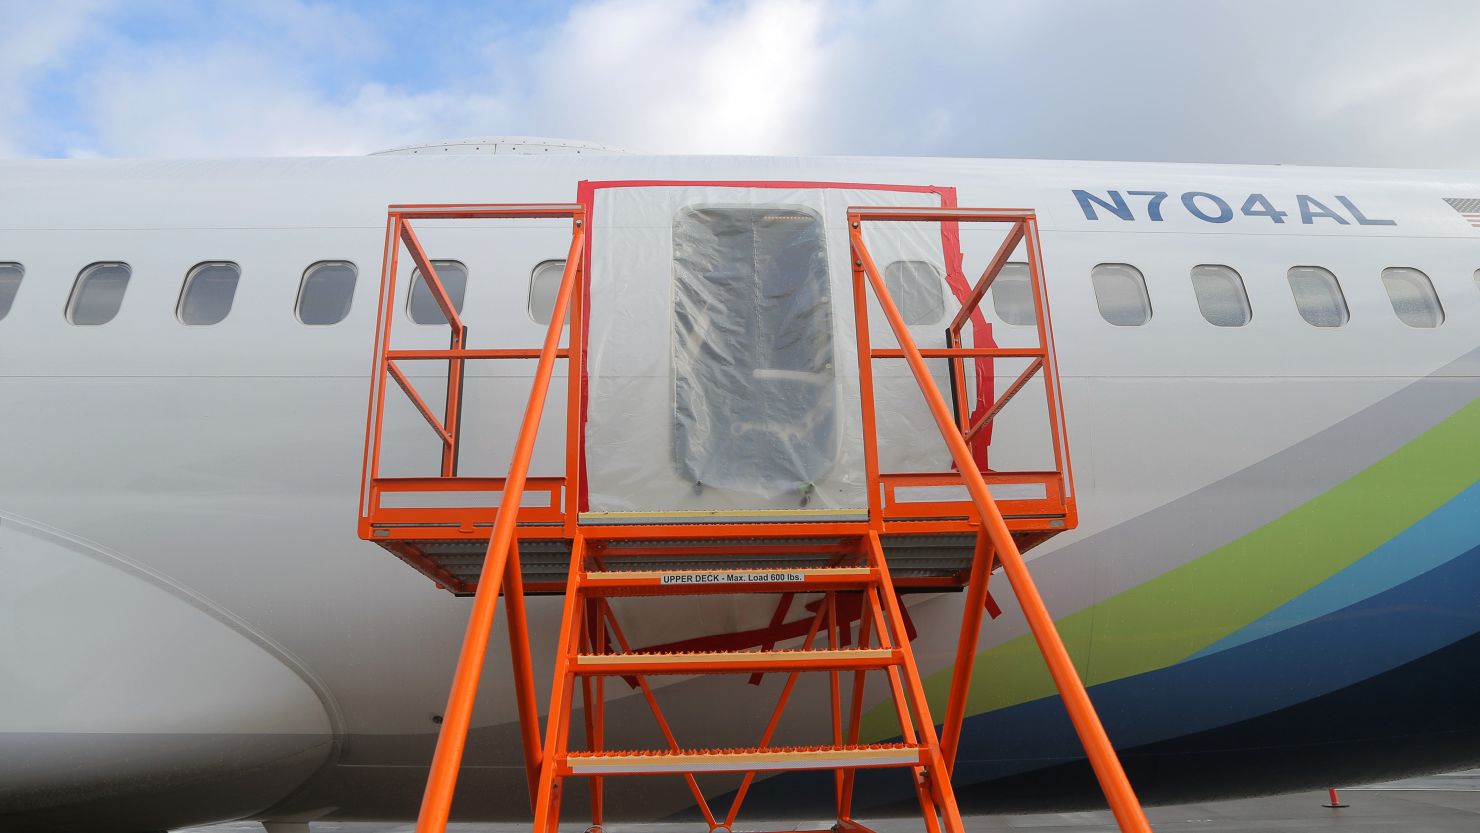 PORTLAND, OREGON - JANUARY 7: In this National Transportation Safety Board (NTSB) handout, plastic covers the exterior of the fuselage plug area of Alaska Airlines Flight 1282 Boeing 737-9 MAX on January 7, 2024 in Portland, Oregon. A door-sized section near the rear of the Boeing 737-9 MAX plane blew off 10 minutes after Alaska Airlines Flight 1282 took off from Portland, Oregon on January 5 on its way to Ontario, California.  (Photo by NTSB via Getty Images)